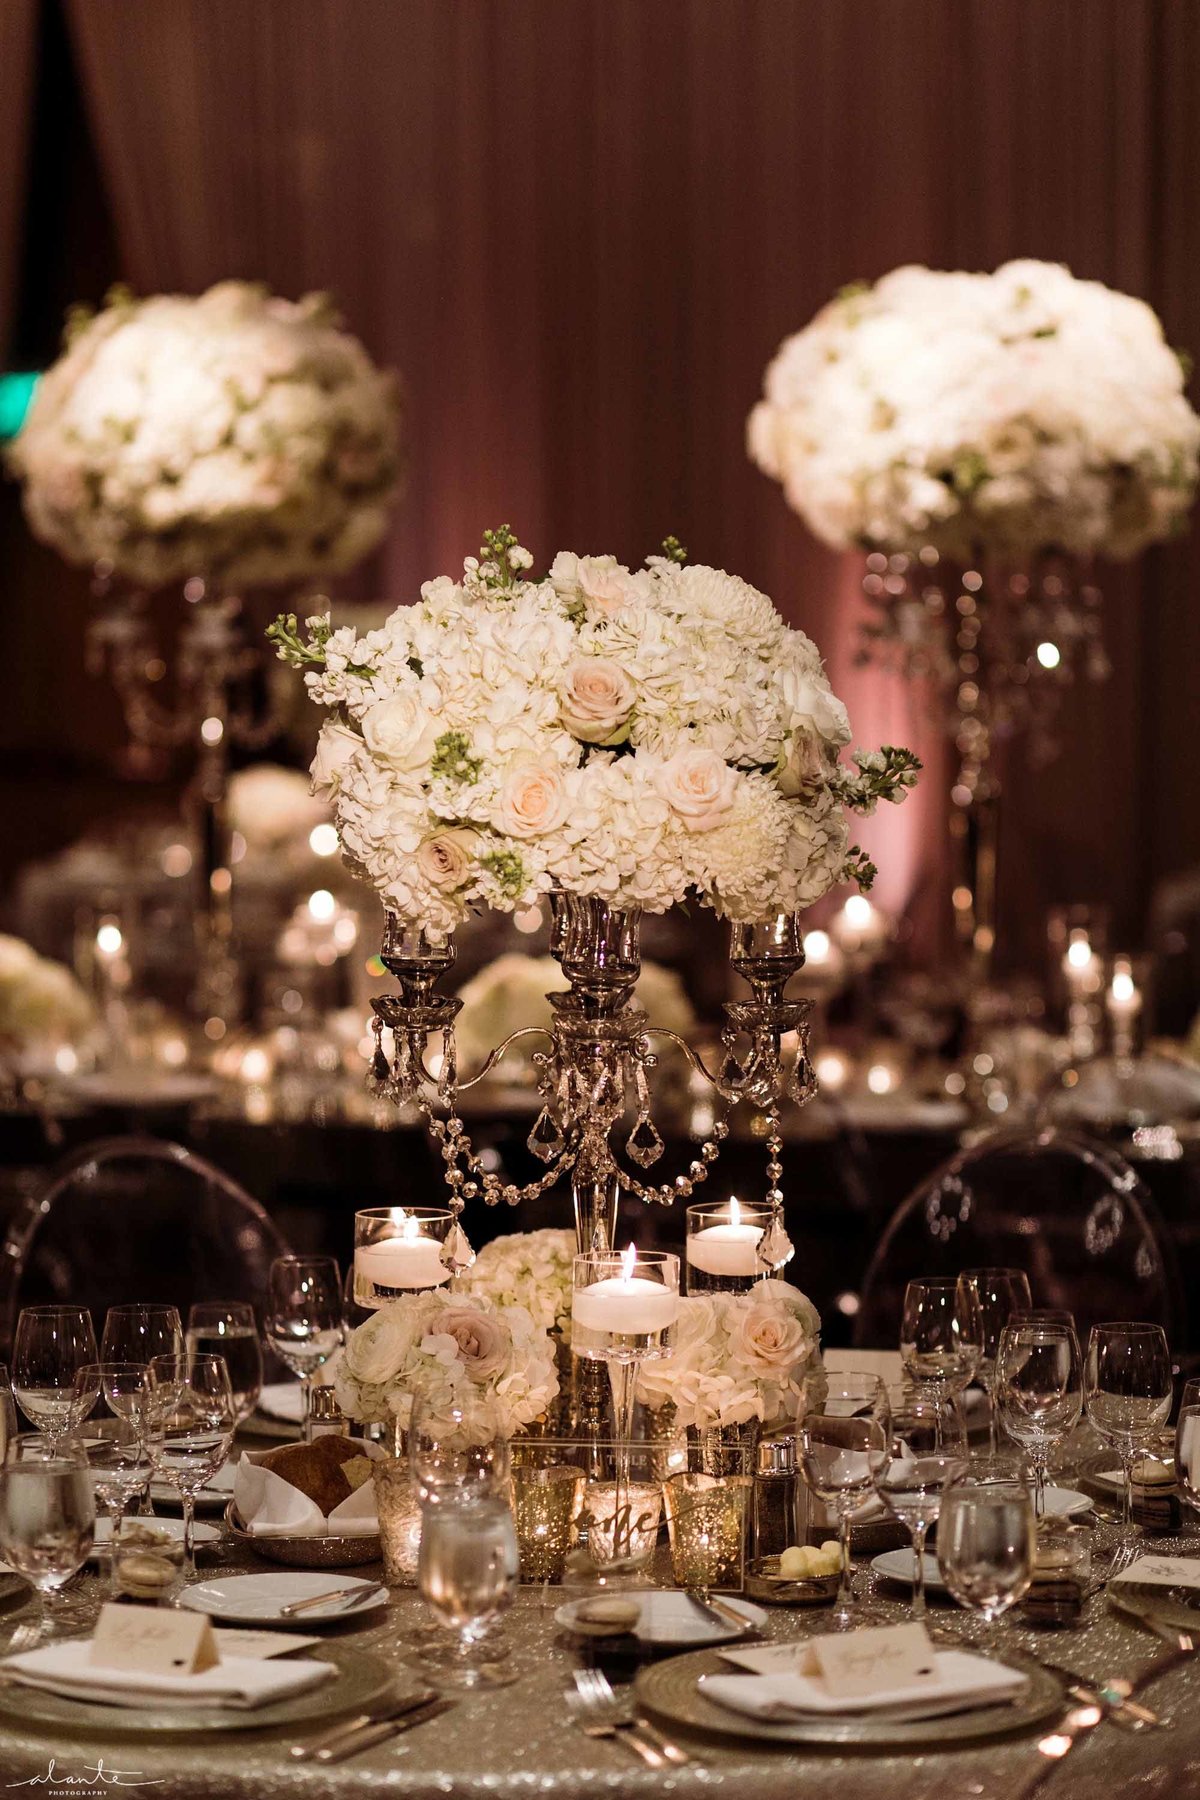 Candlelight and sparkle were the key for warmth at this winter wedding.